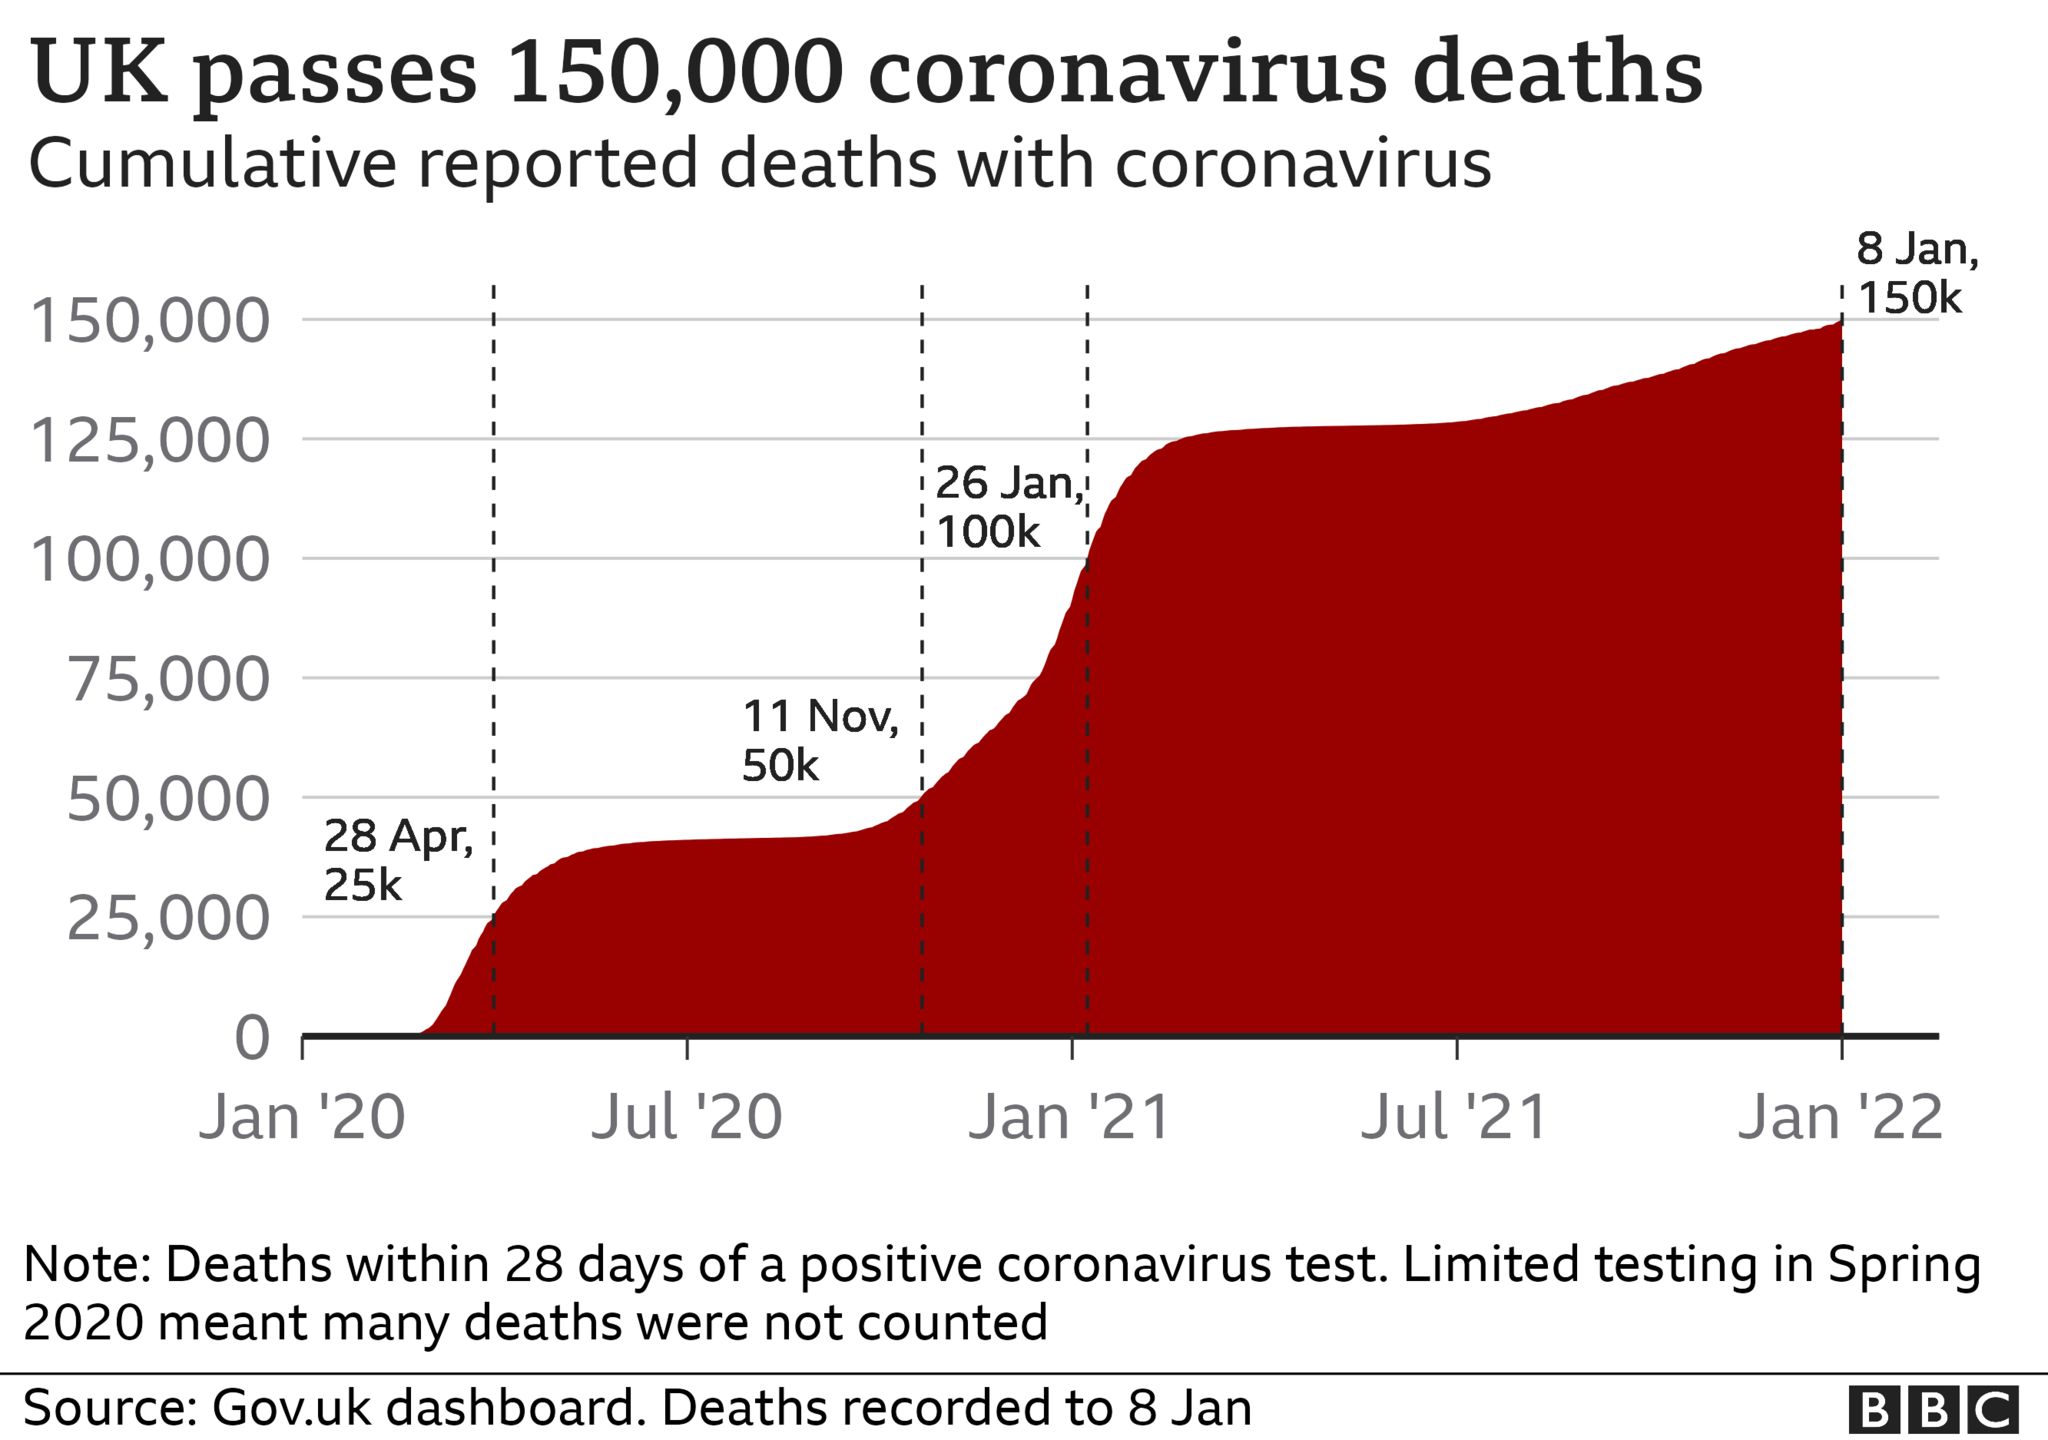 Graph showing cumulative reported deaths with coronavirus in the UK